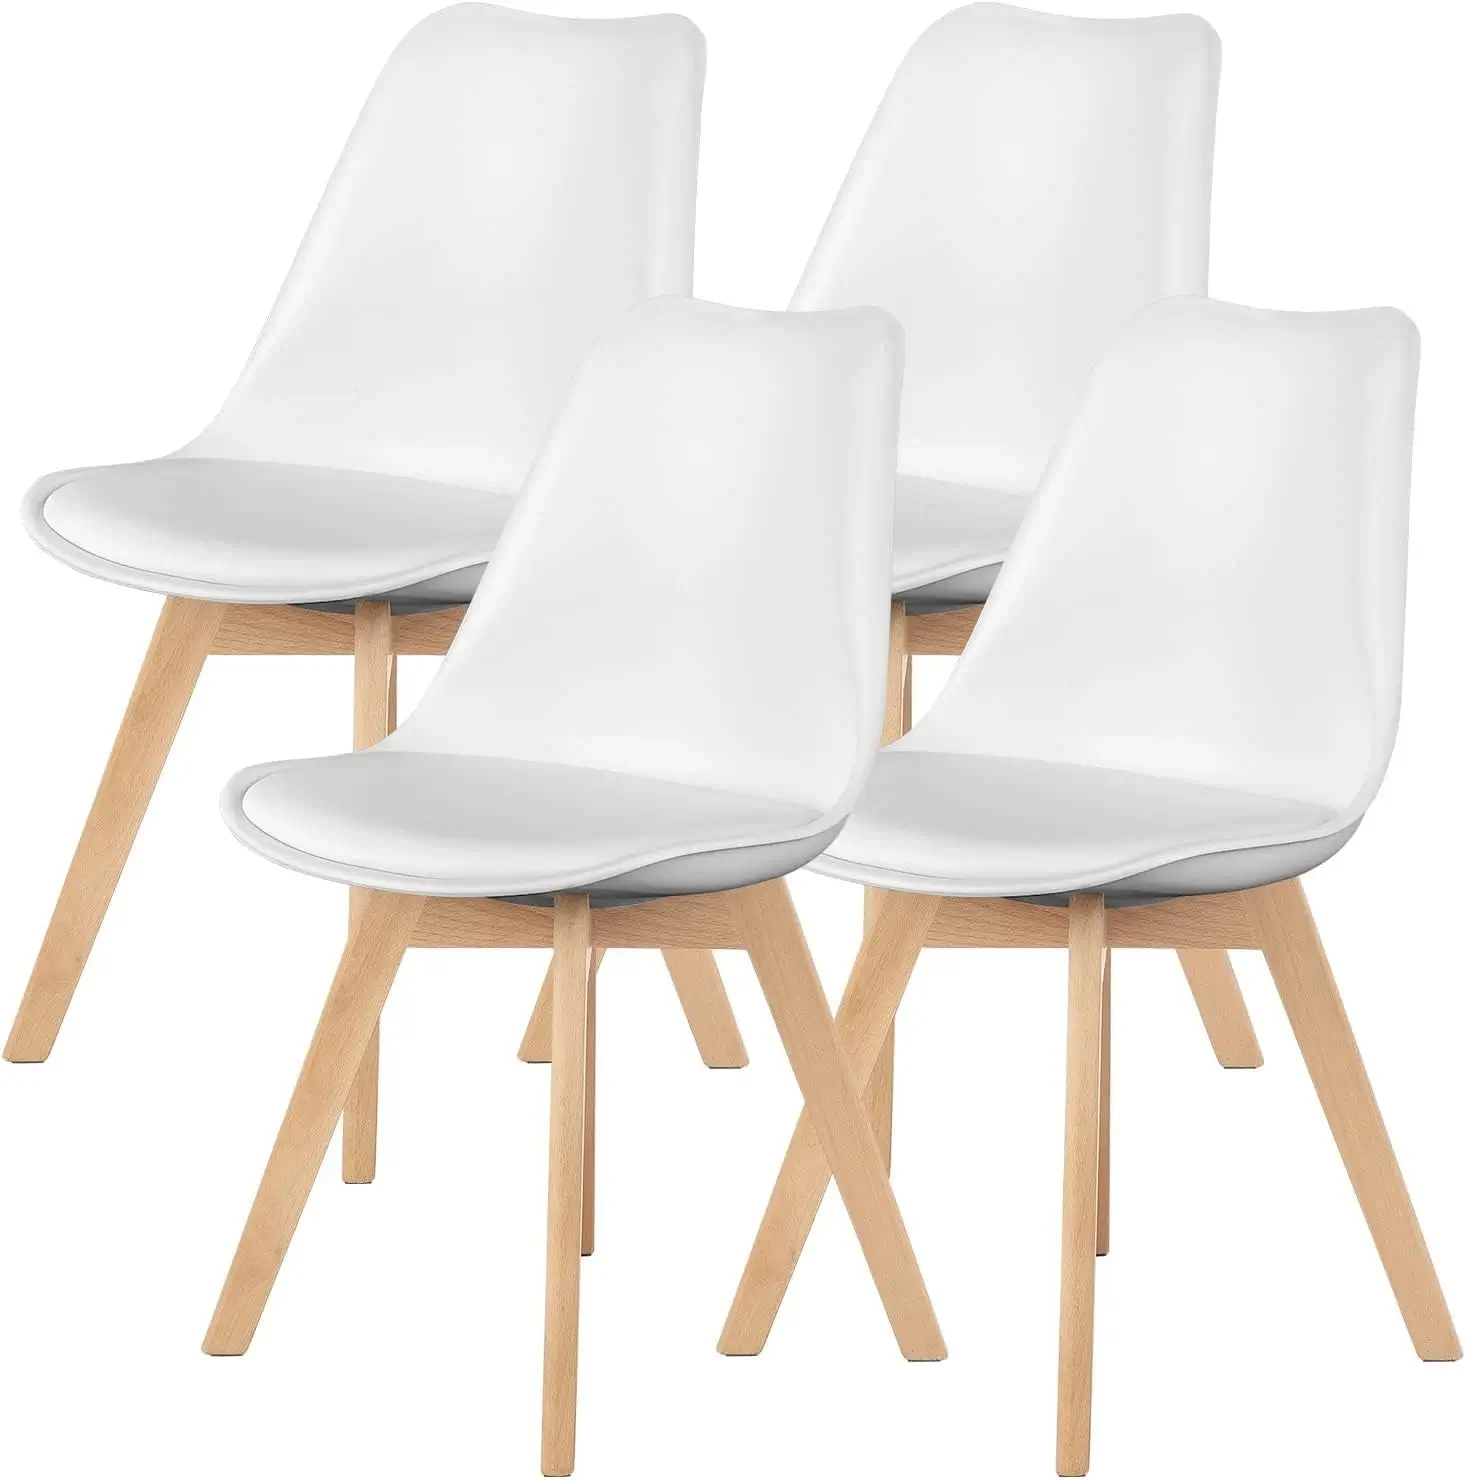 Kitchen & Dining Room Chairs, Set of 4, White